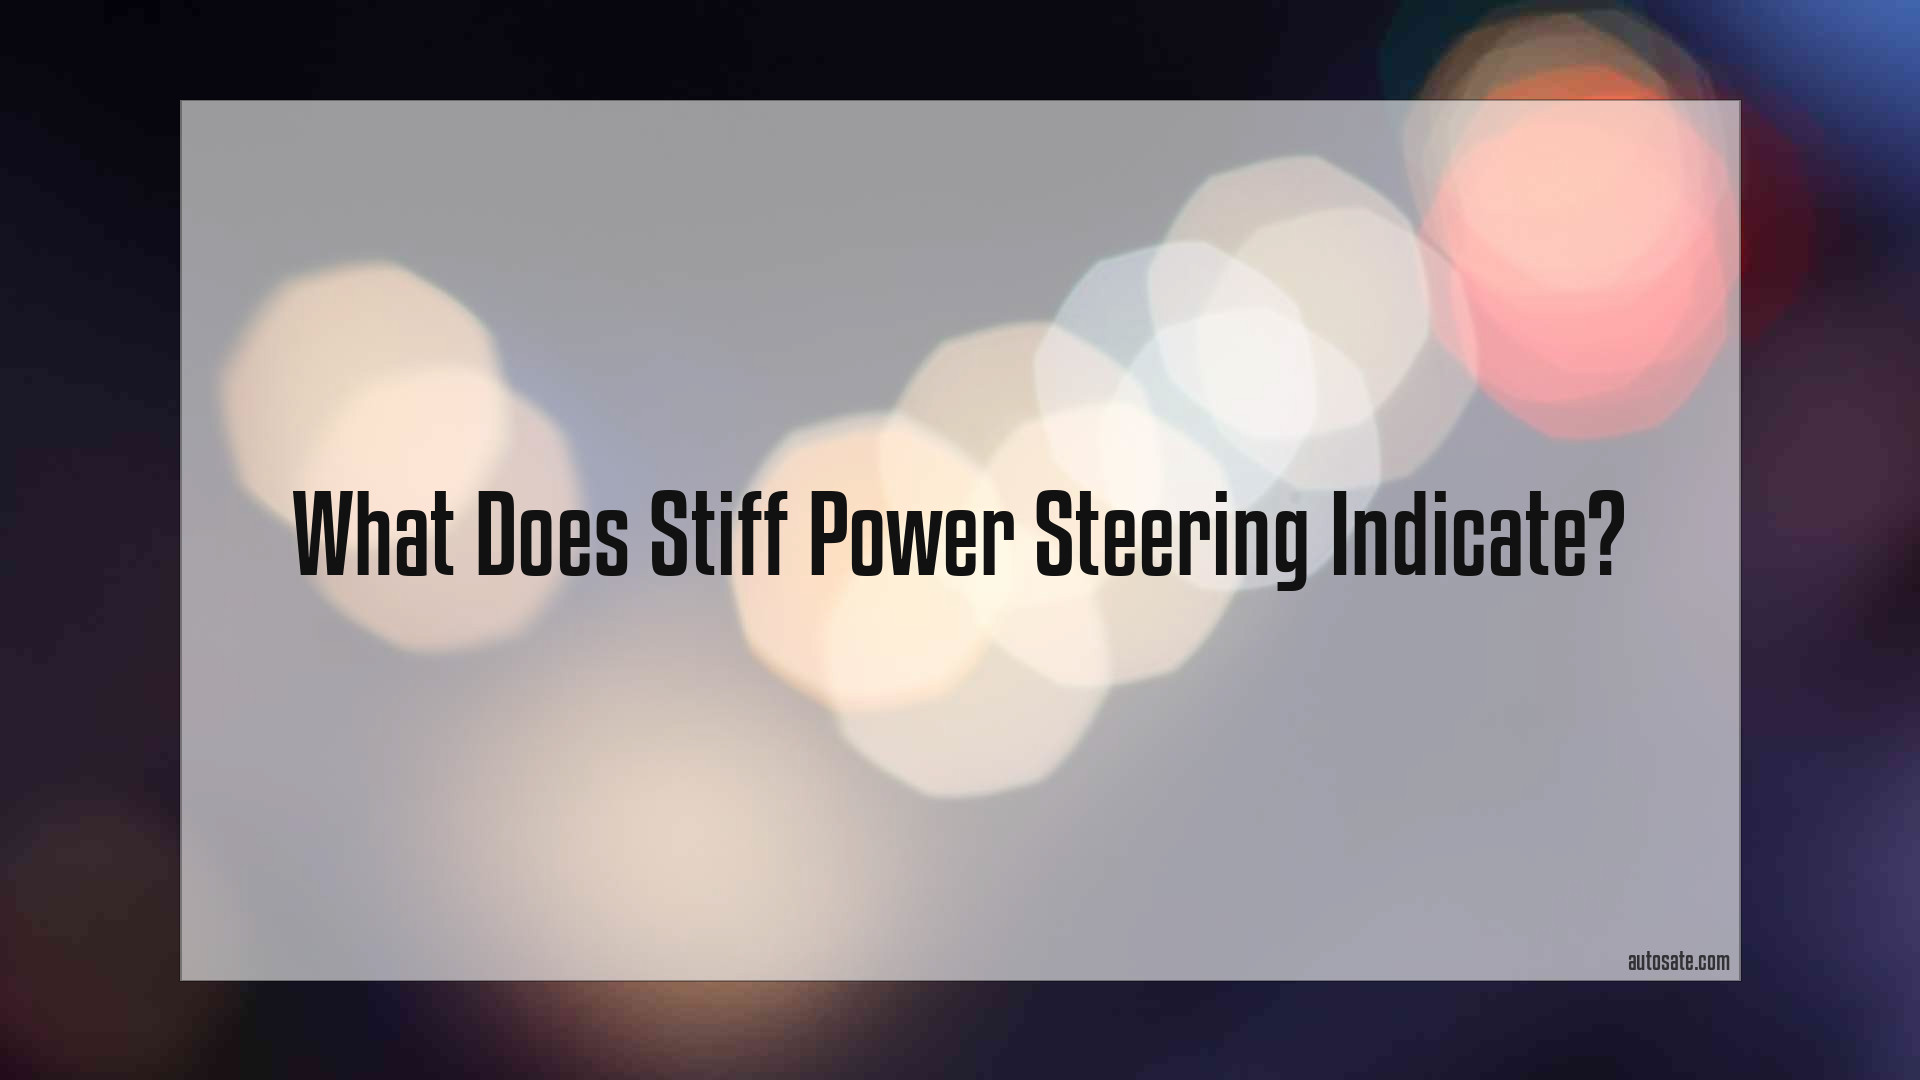 What Does Stiff Power Steering Indicate